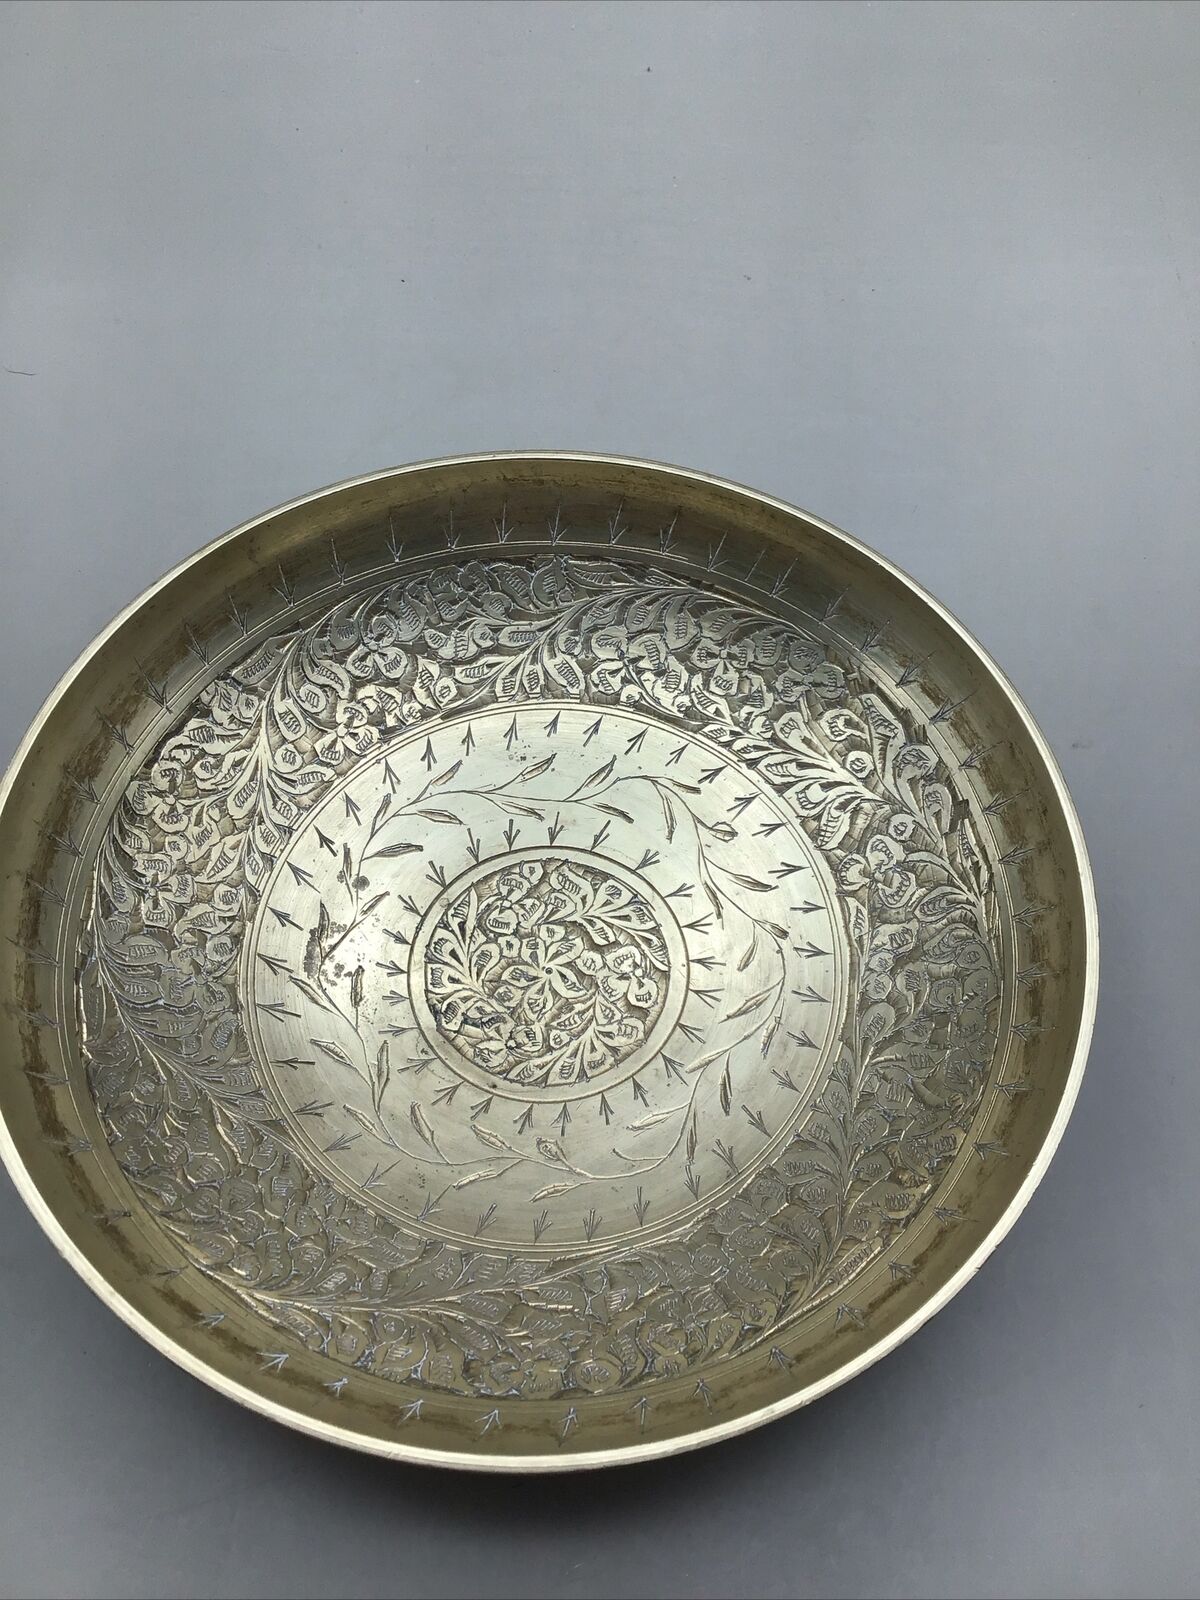 Vintage Etched Brass Bowl.  Floral Design. 6.5” diameter x 1.75”  tall. India.